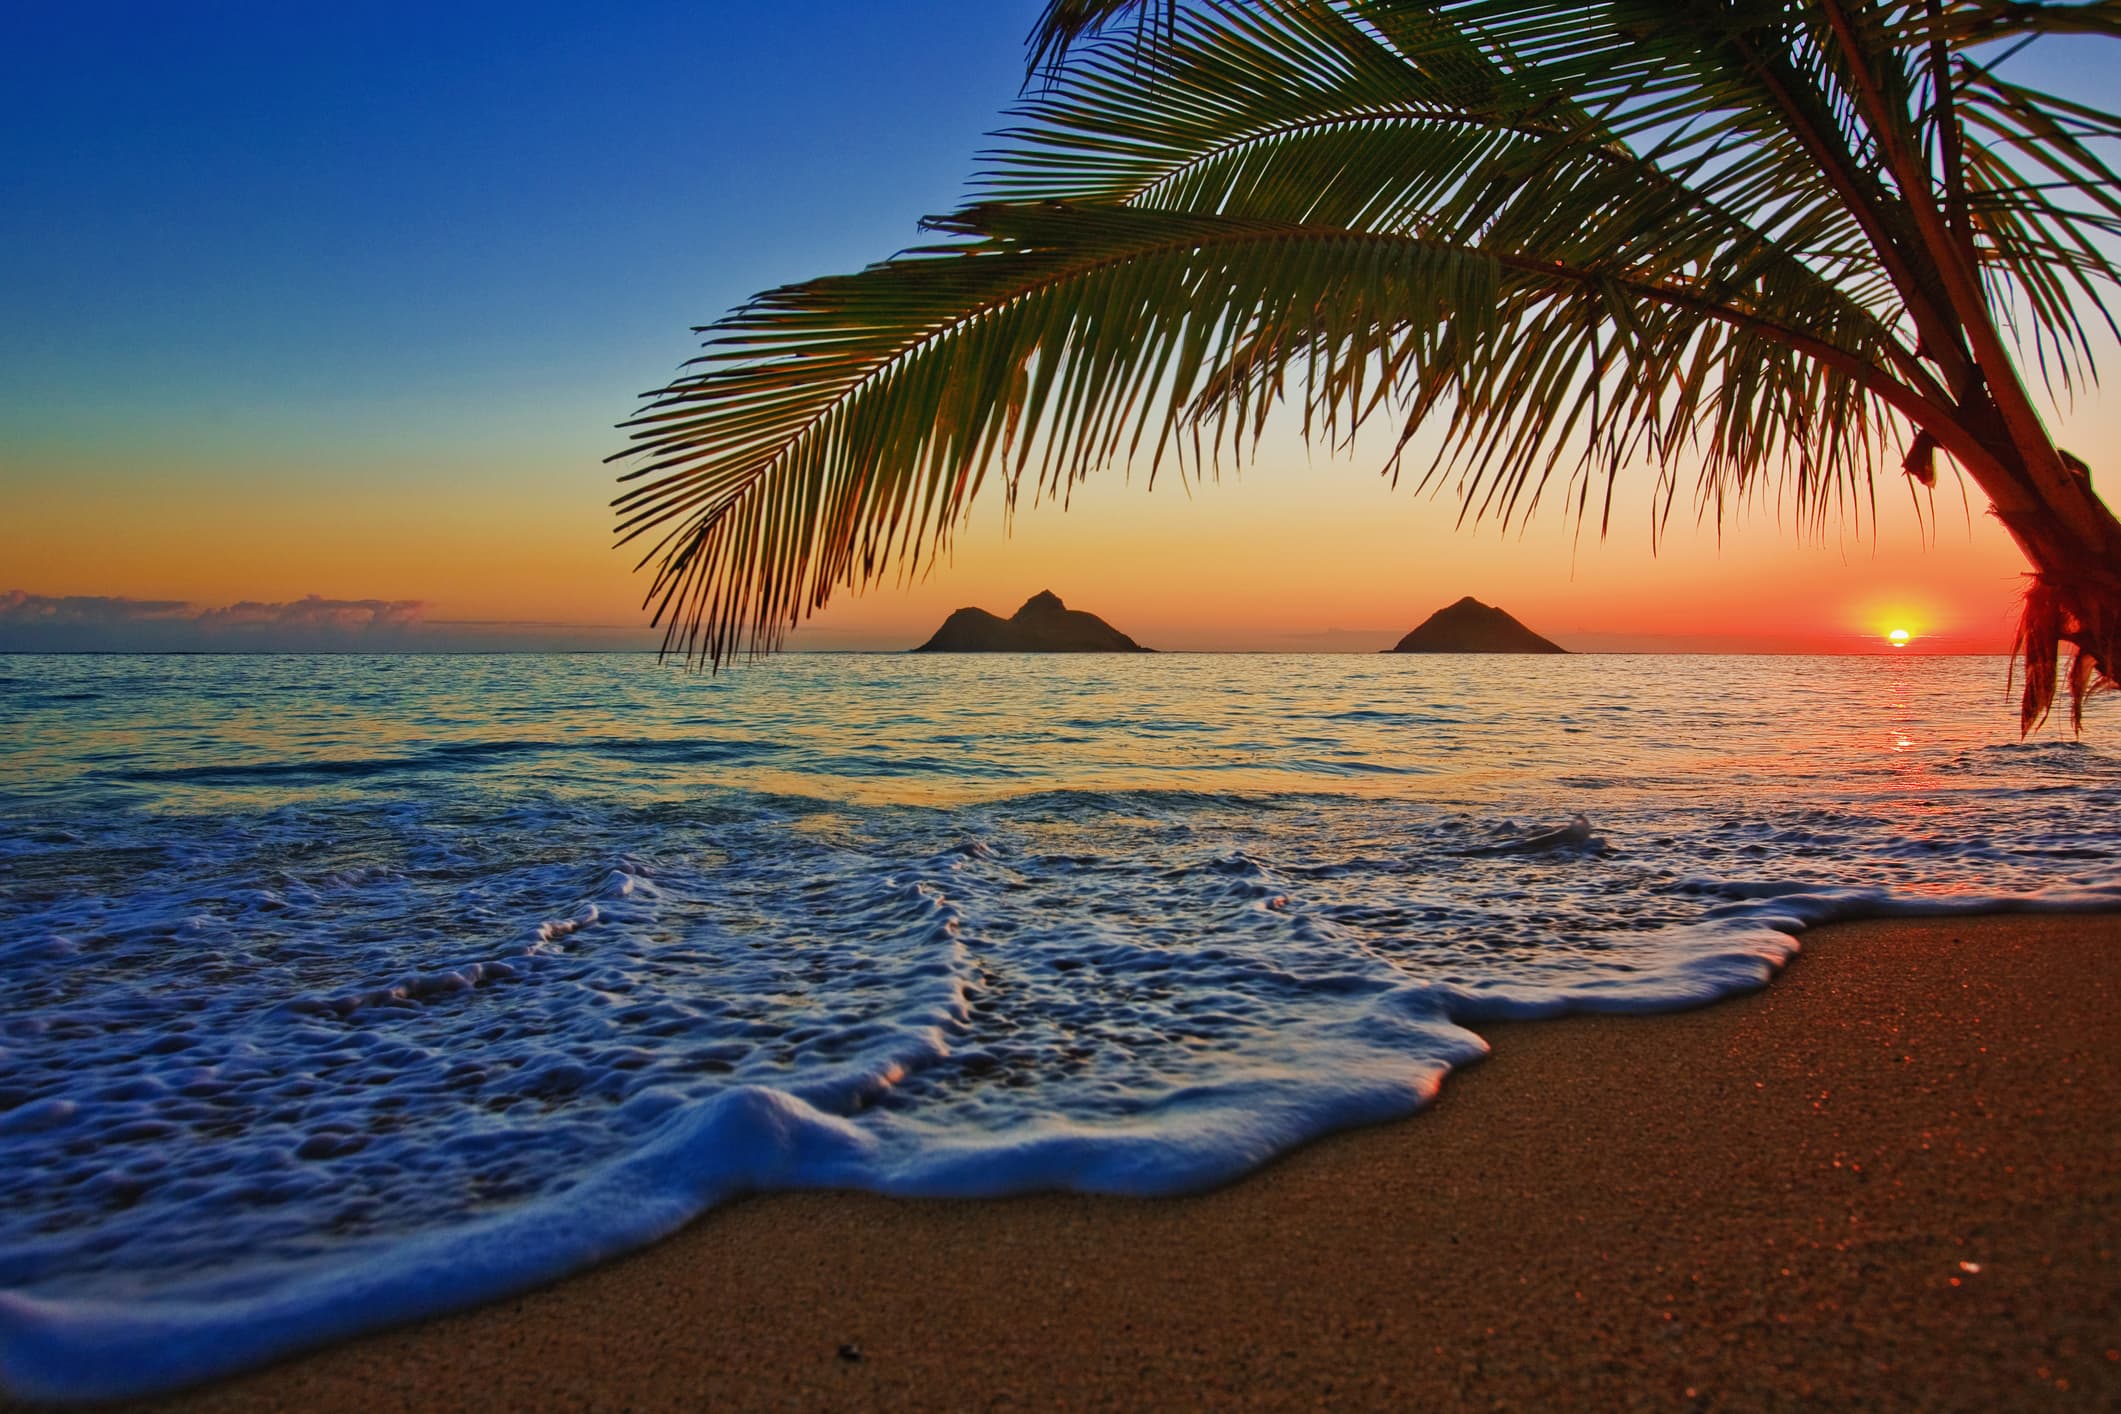 A waterside view of Lanikai Beach, Oahu, Hawaii, with gentle surf, palm trees, and sunset.